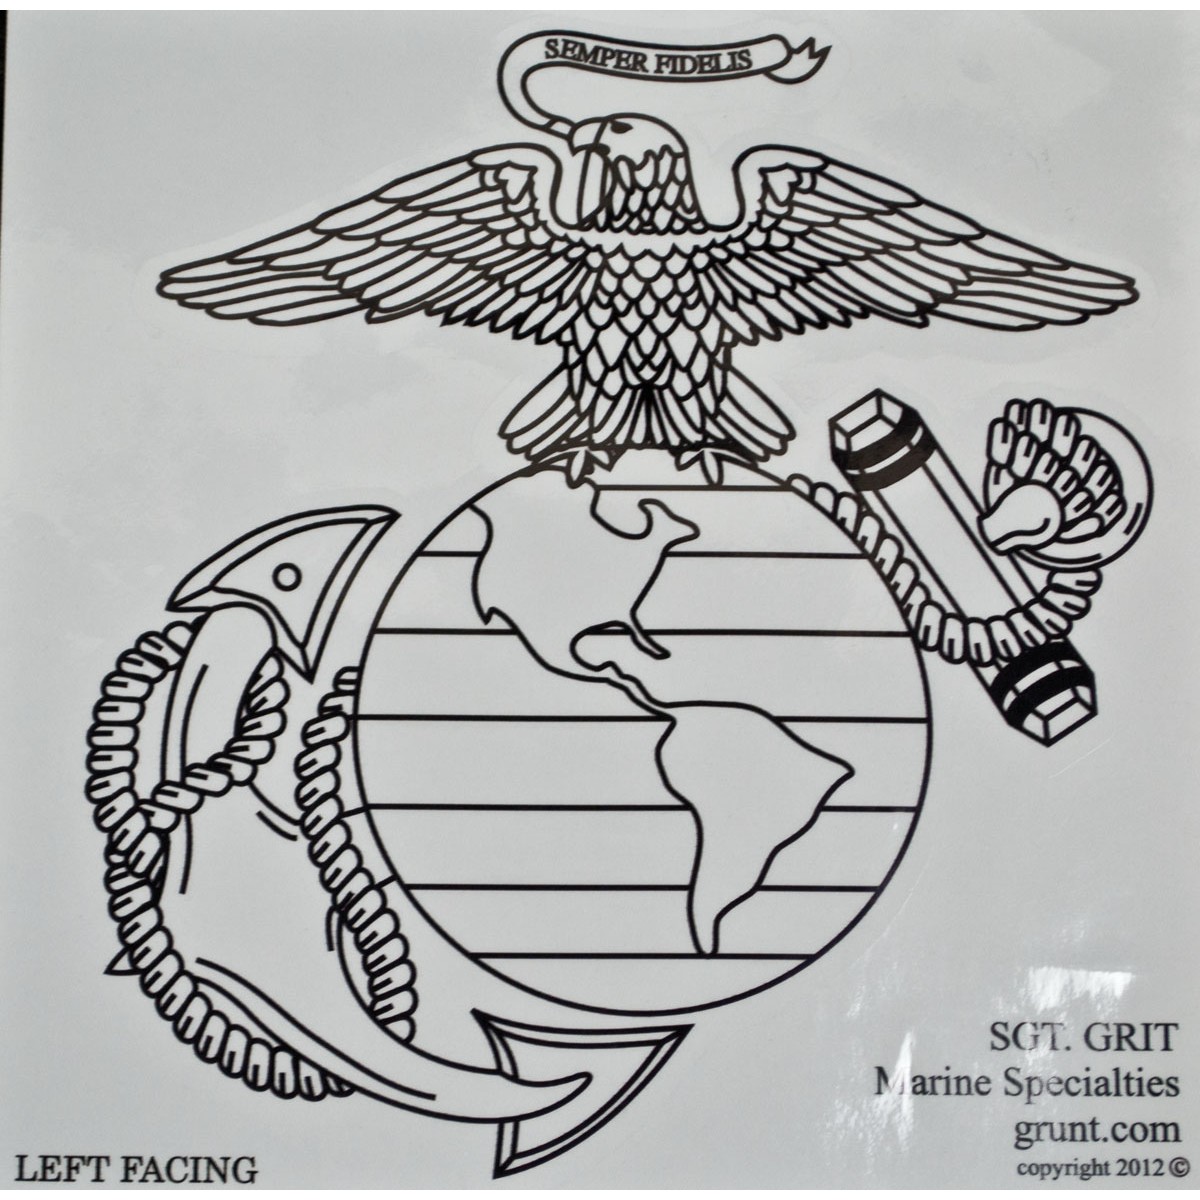 12 Black Left Eagle, Globe, and Anchor Decal | Sgt Grit - Marine 